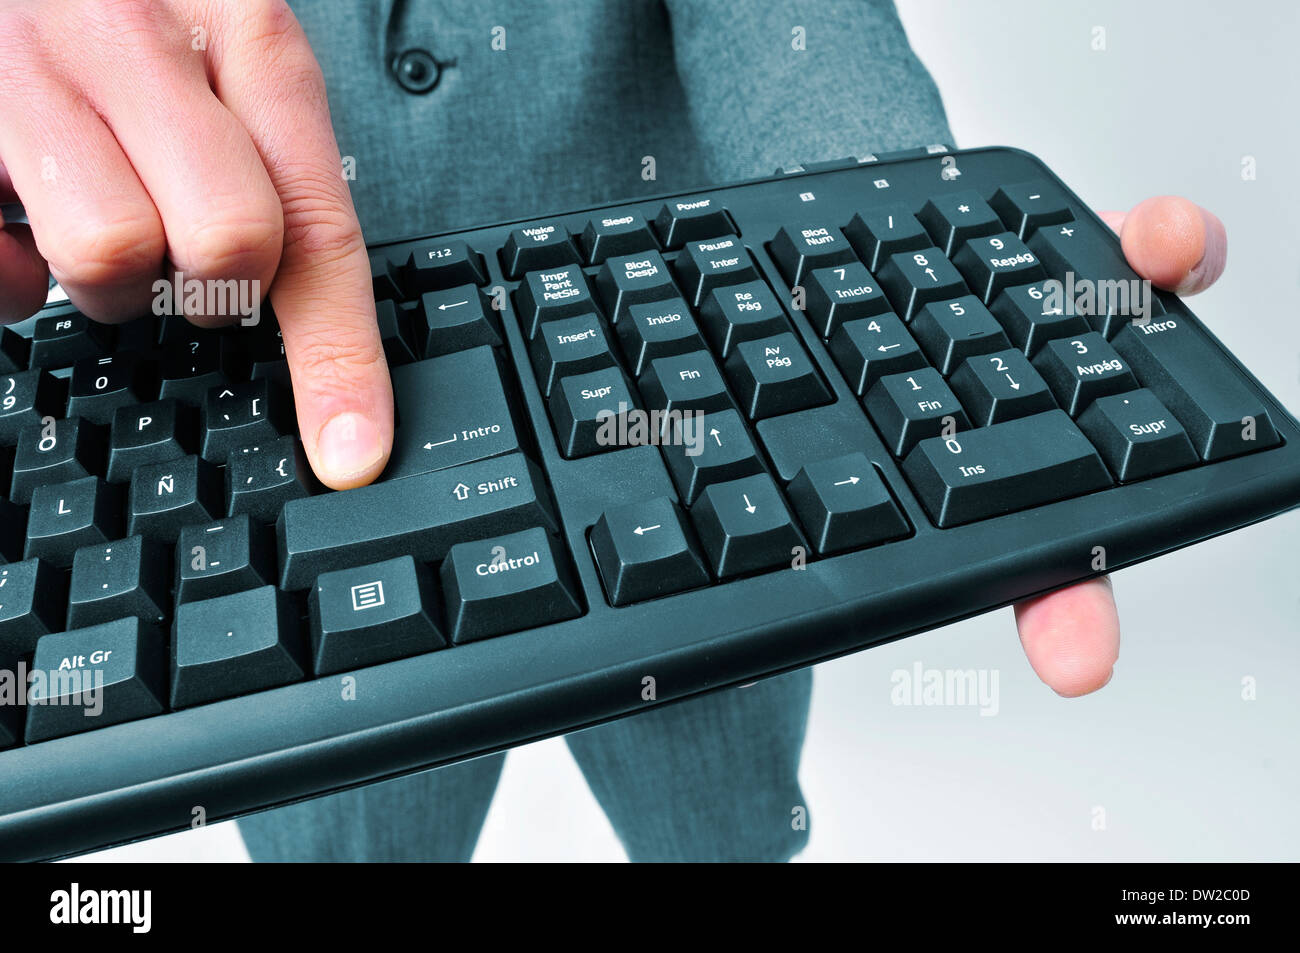 Intro Key High Resolution Stock Photography and Images - Alamy